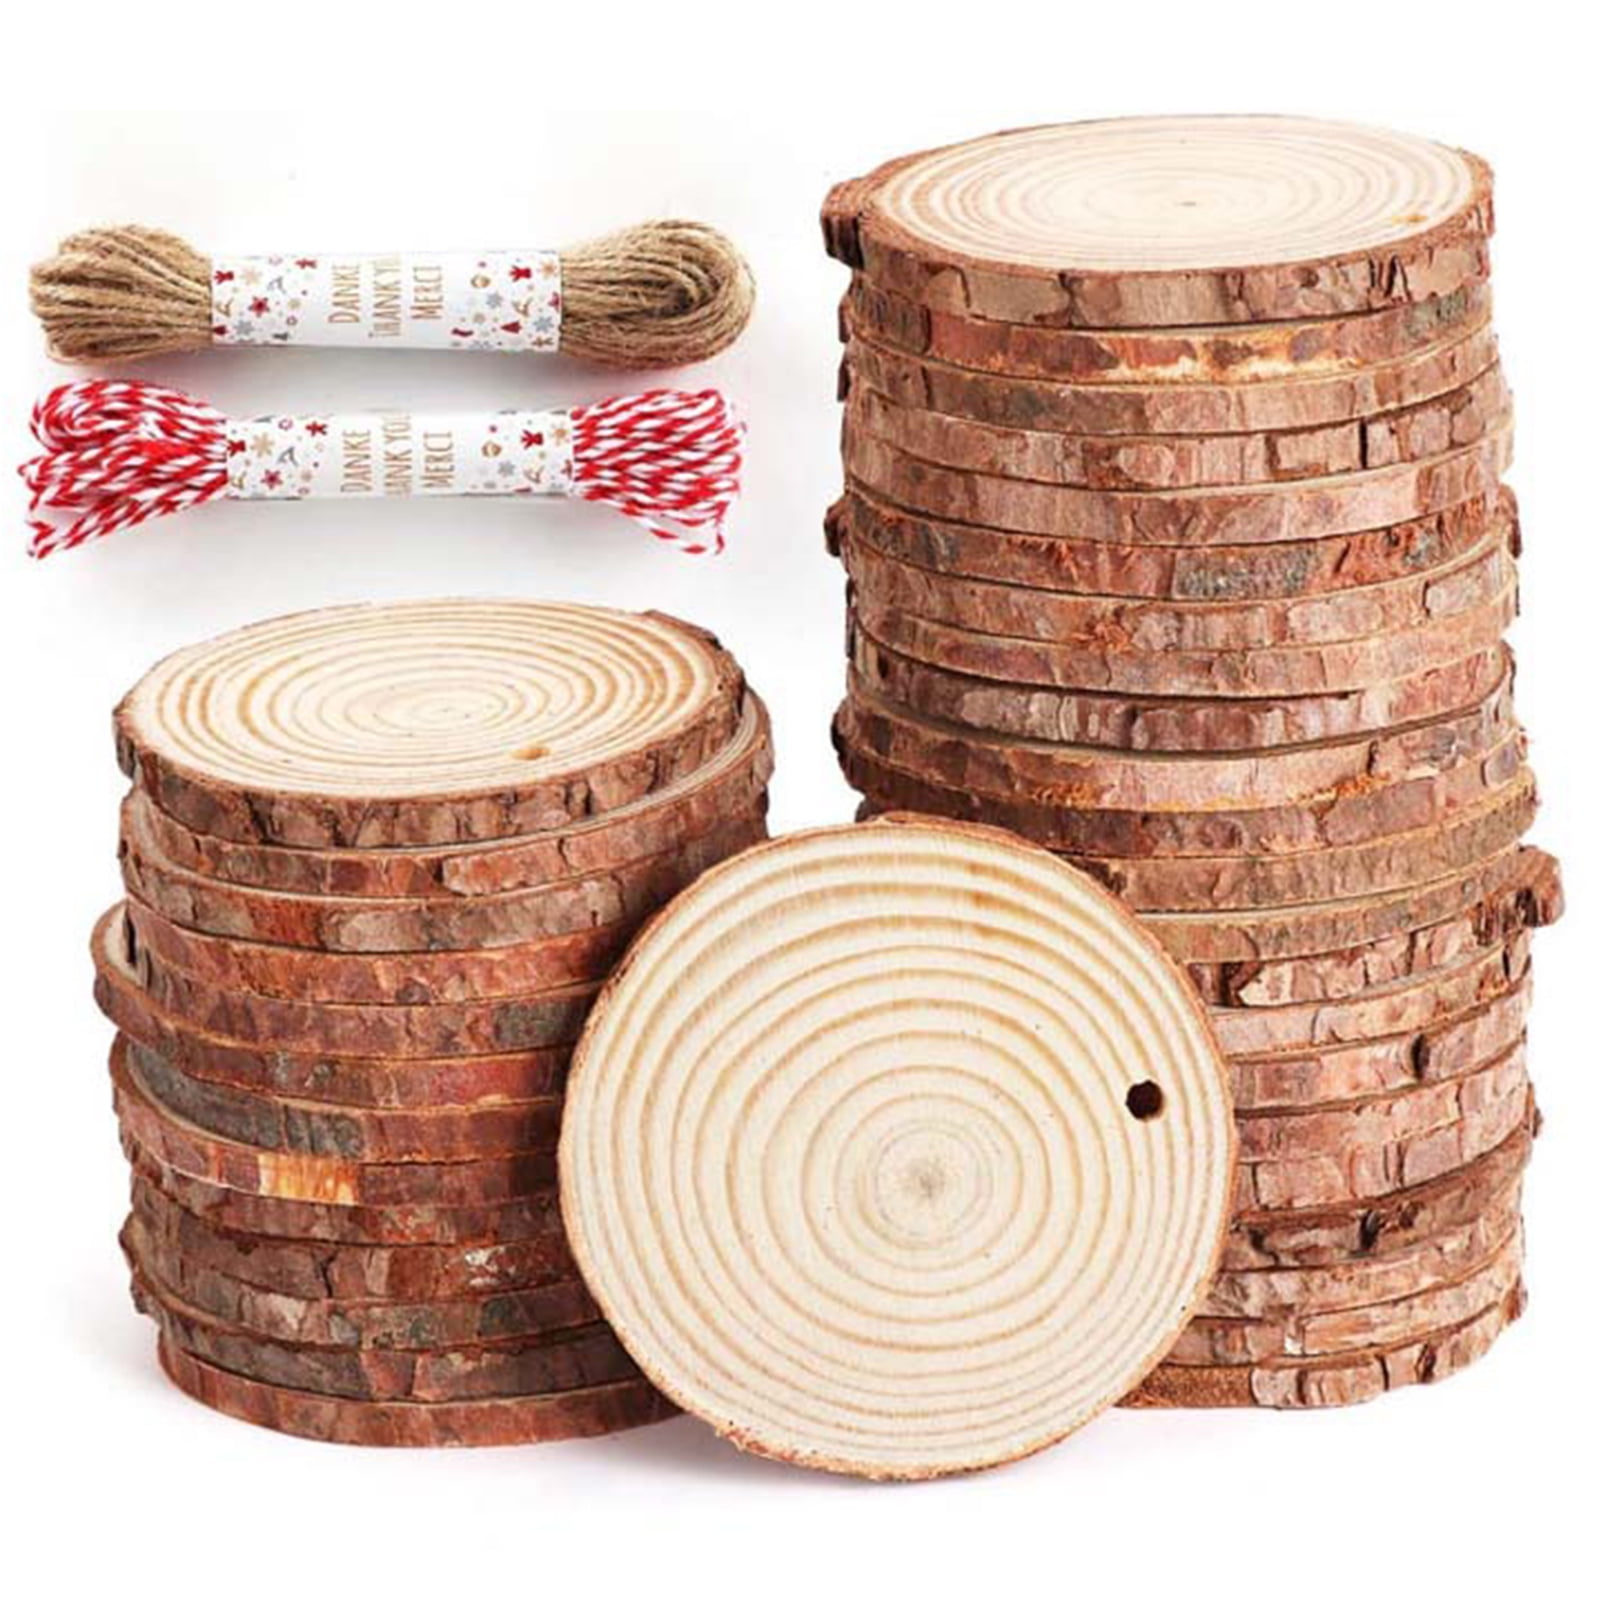 10pcs/Set Natural Wooden Slices With Top Hole For Handmade DIY Craft Decorative 